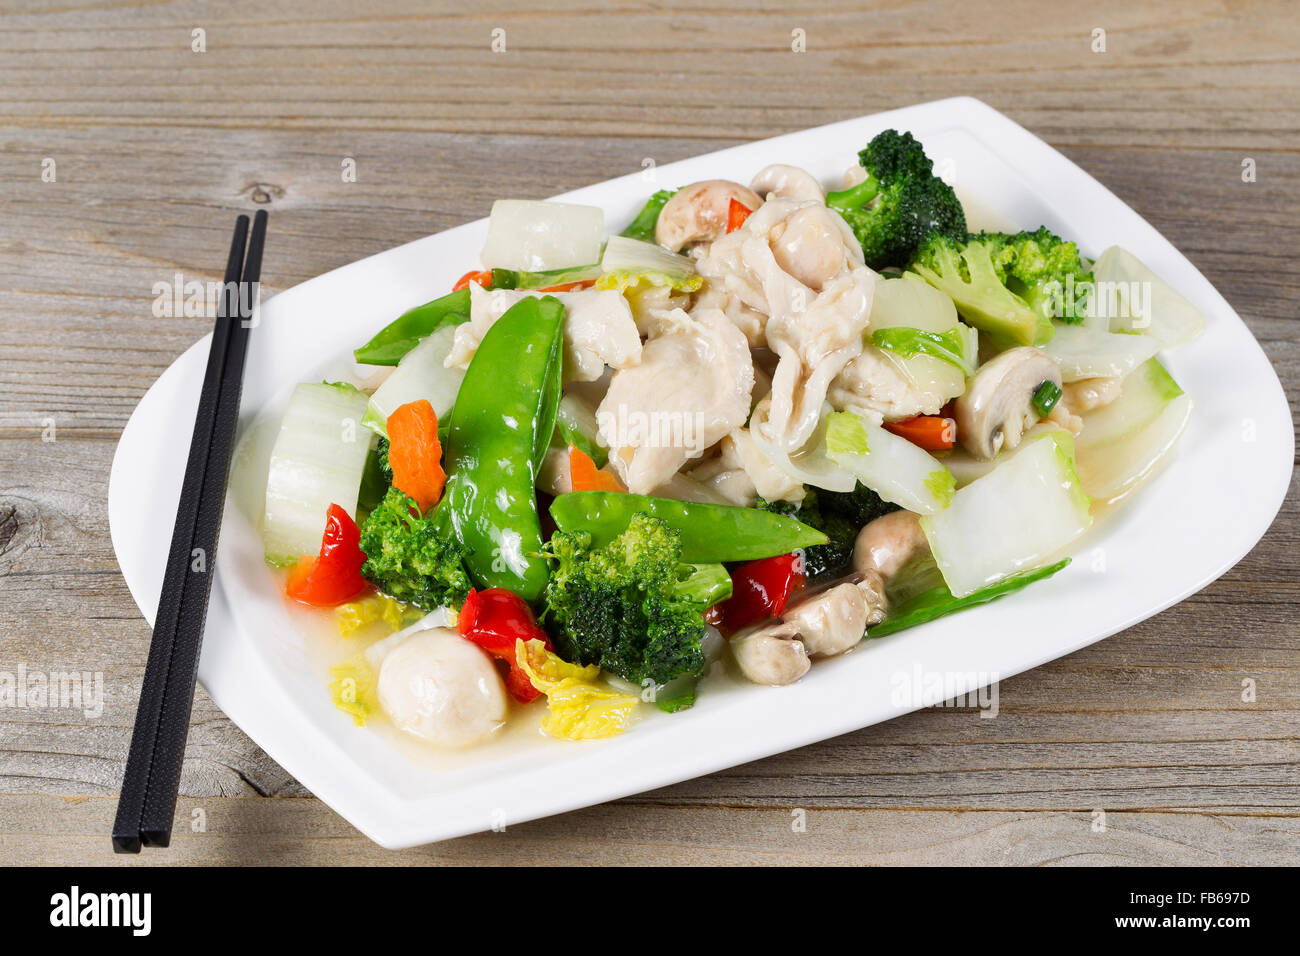 Close up view of stir fried white chicken pieces with broccoli, snow peas, peppers and mushroom in white plate. Stock Photo